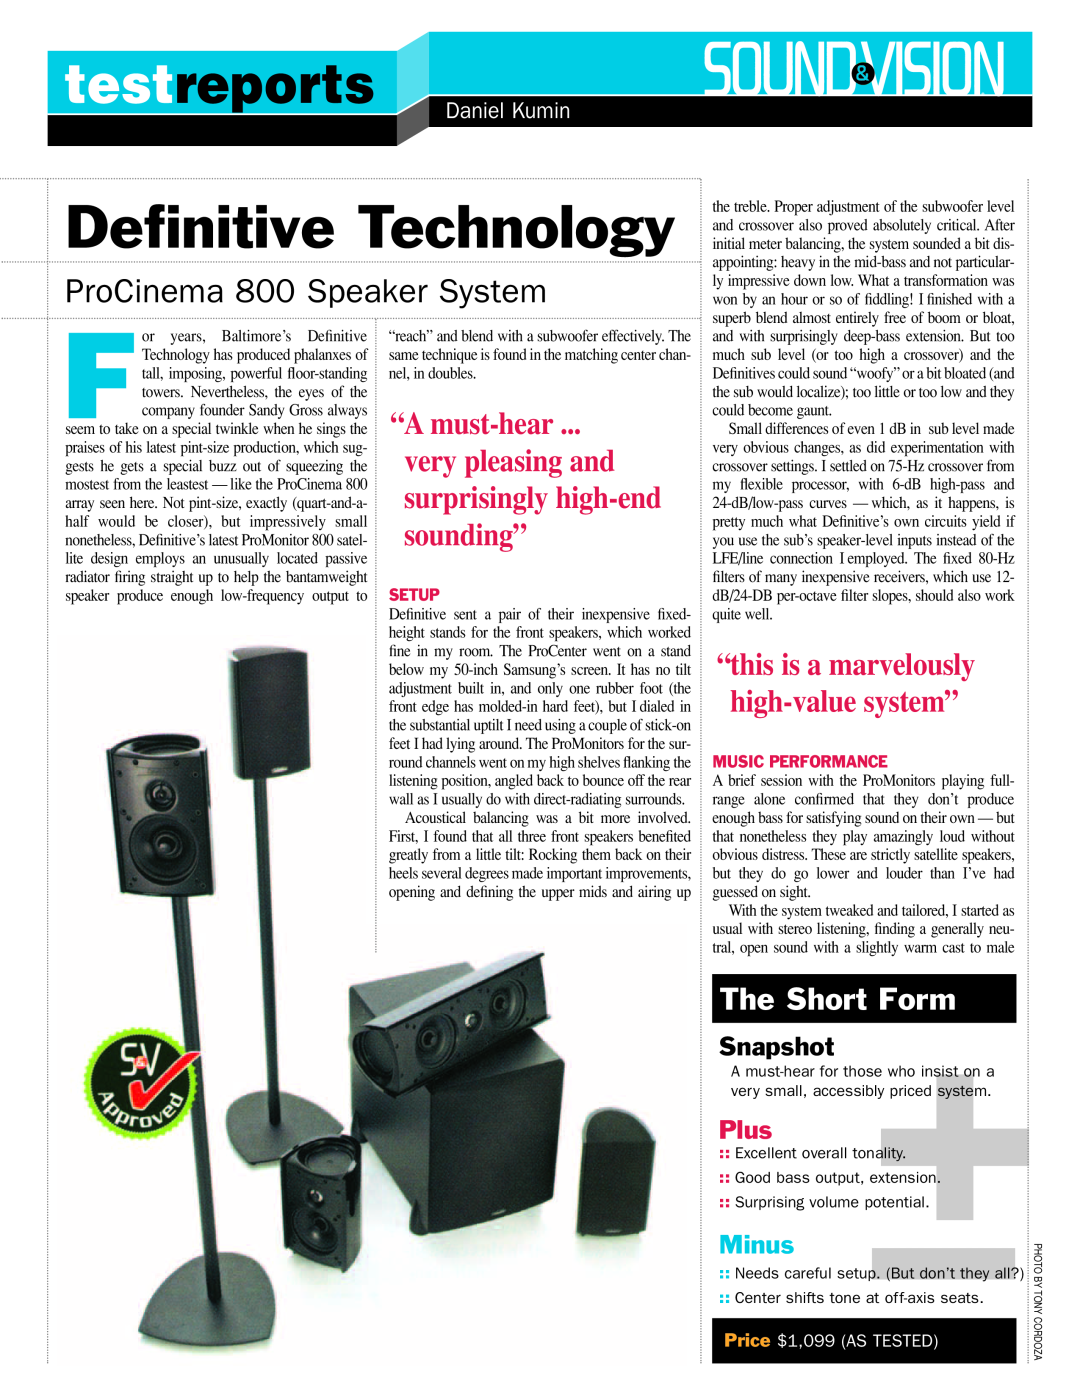 Definitive Technology SV1106 manual testreports, “A must-hear, “this is a marvelously, high-valuesystem”, The Short Form 